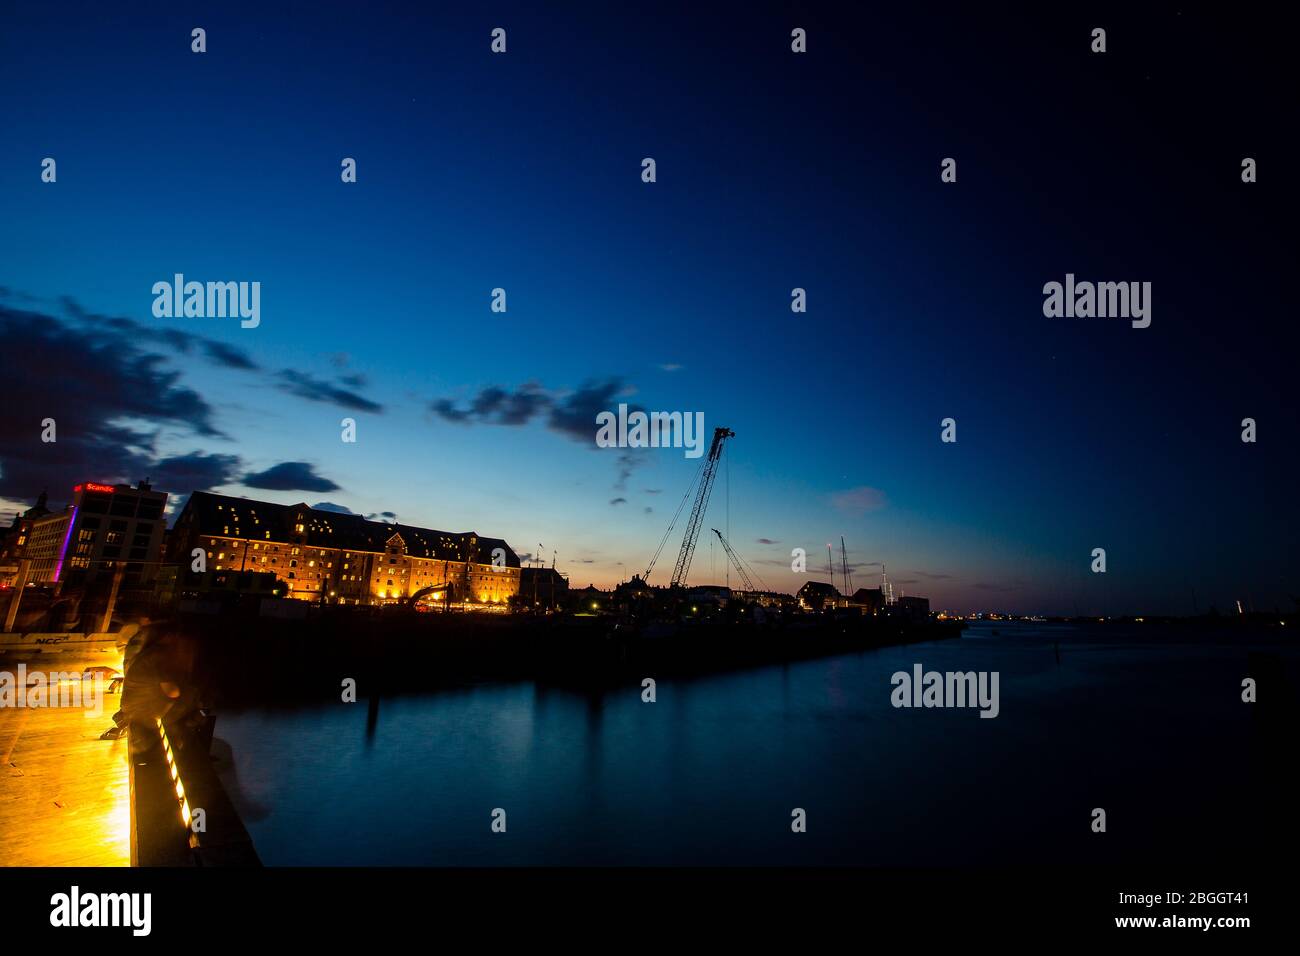 Evening view of old historical buildings in Copenhagen, Denmark, over the water. Shot at twilight (blue hour) Stock Photo